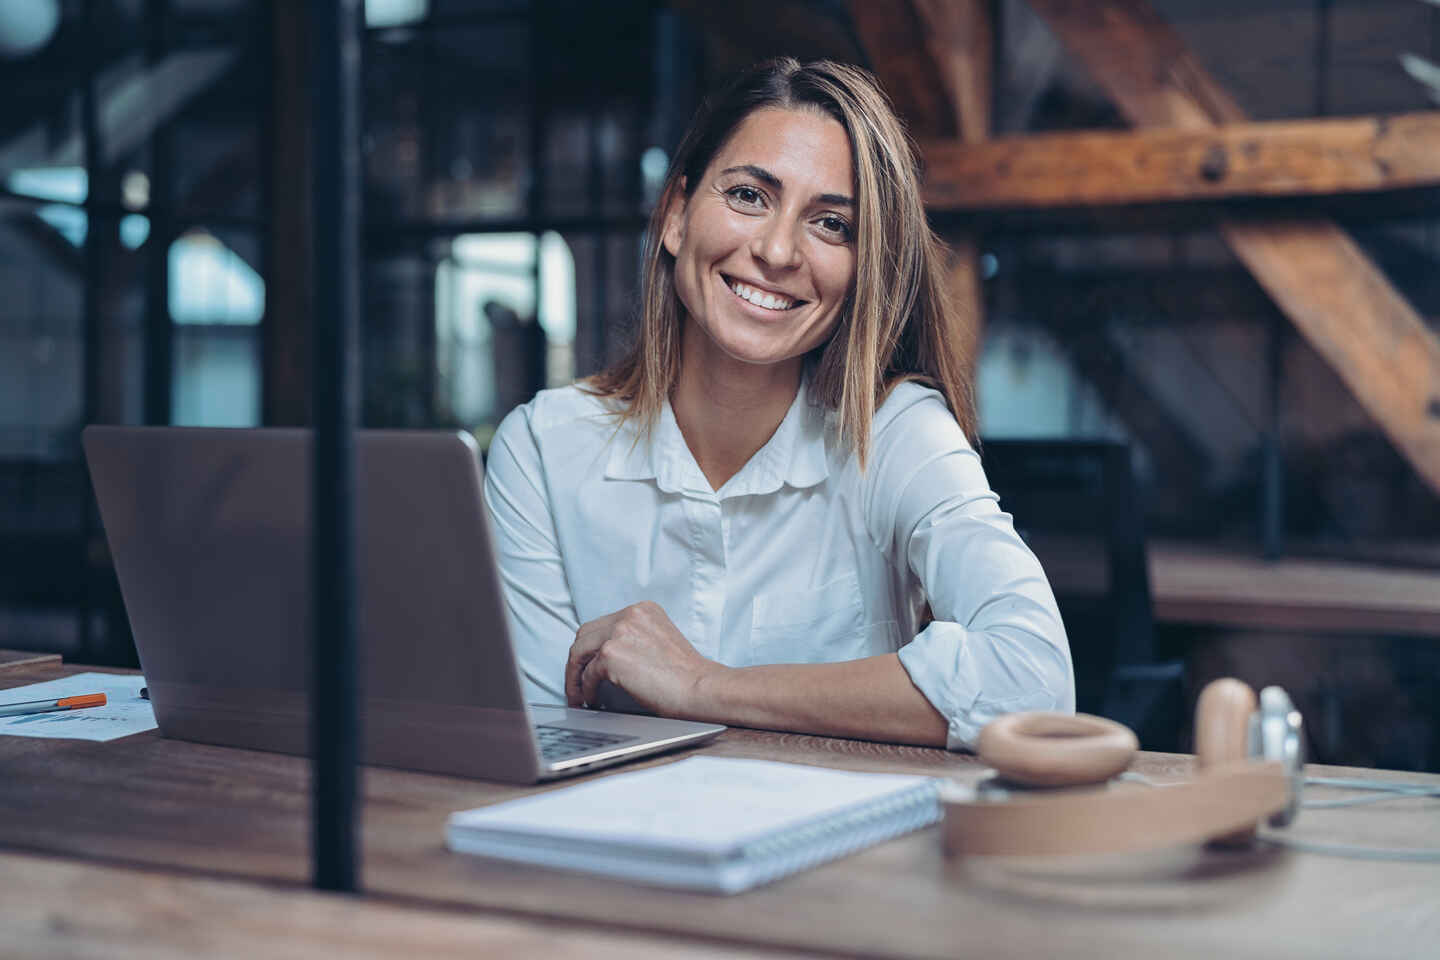 Woman in office, smiling